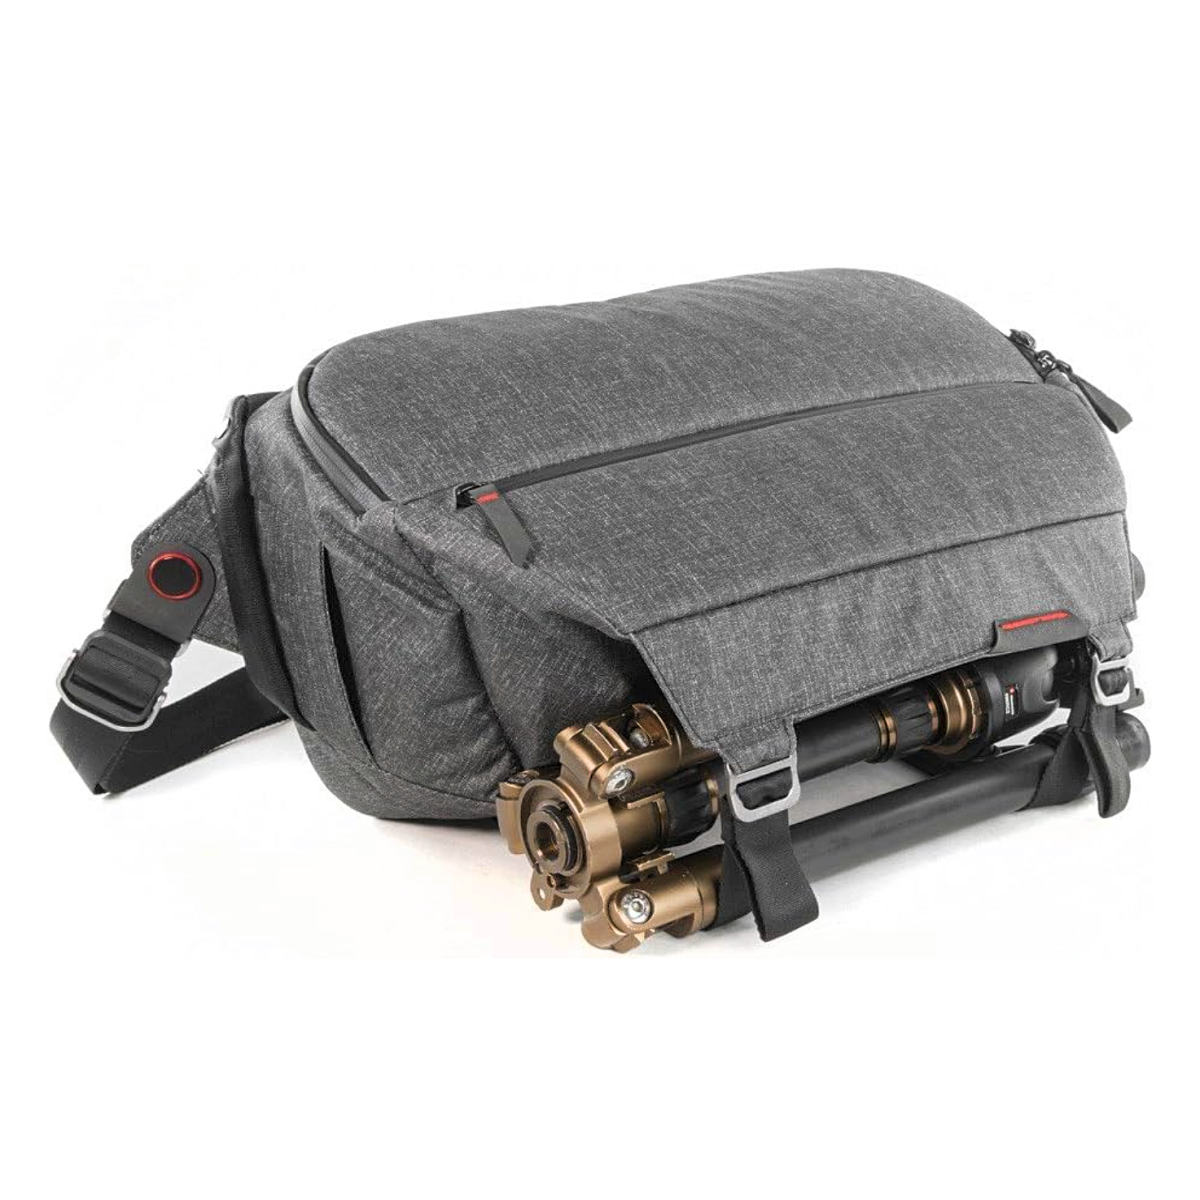 A Peak Design Everyday Sling 10L camera bag with tripod attached